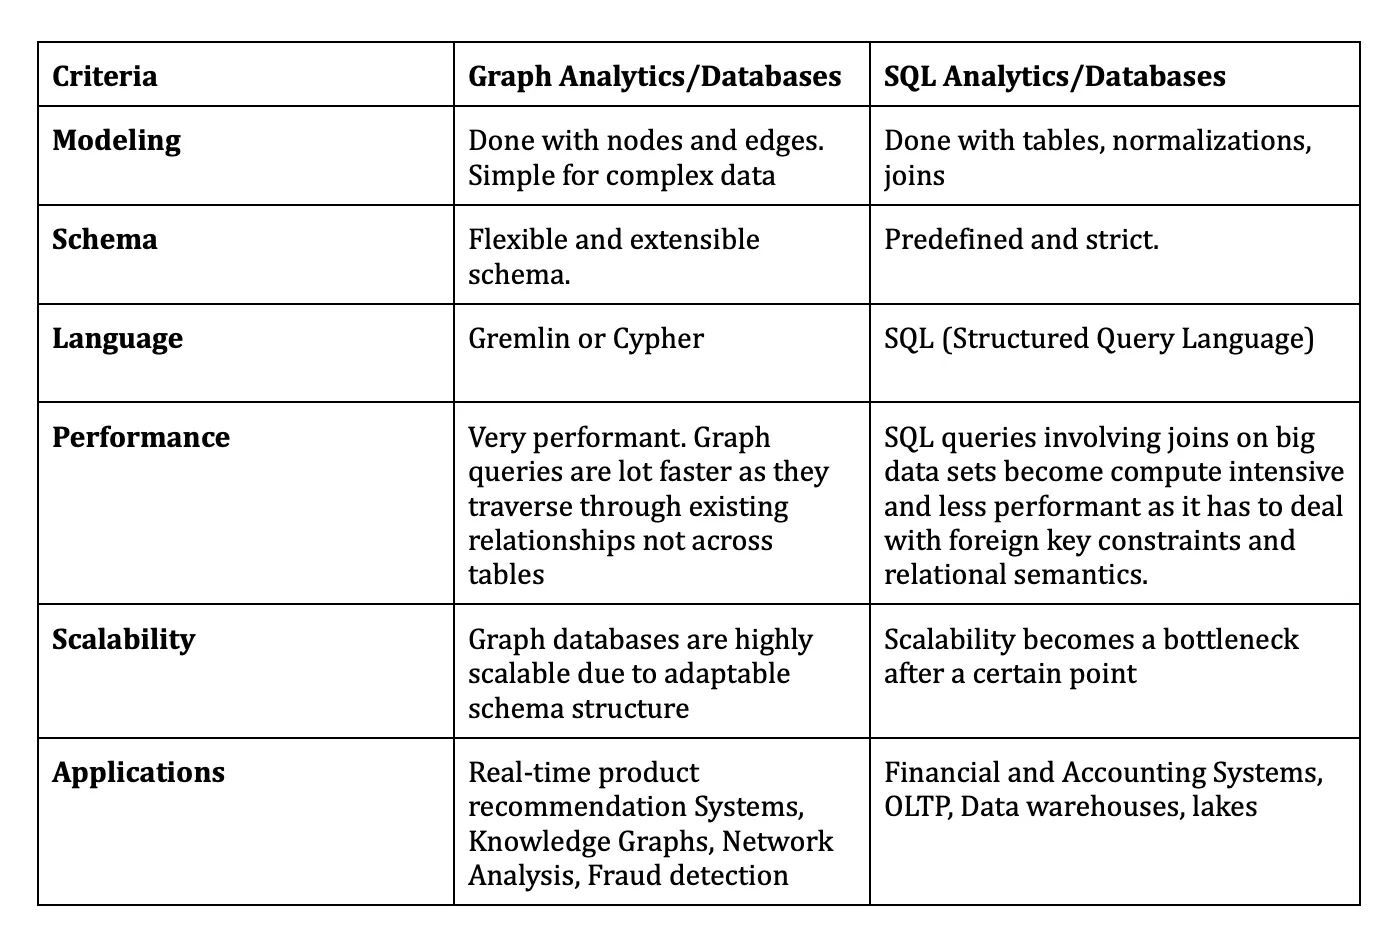                                              Table Comparison of Graph vs Traditional Analytics